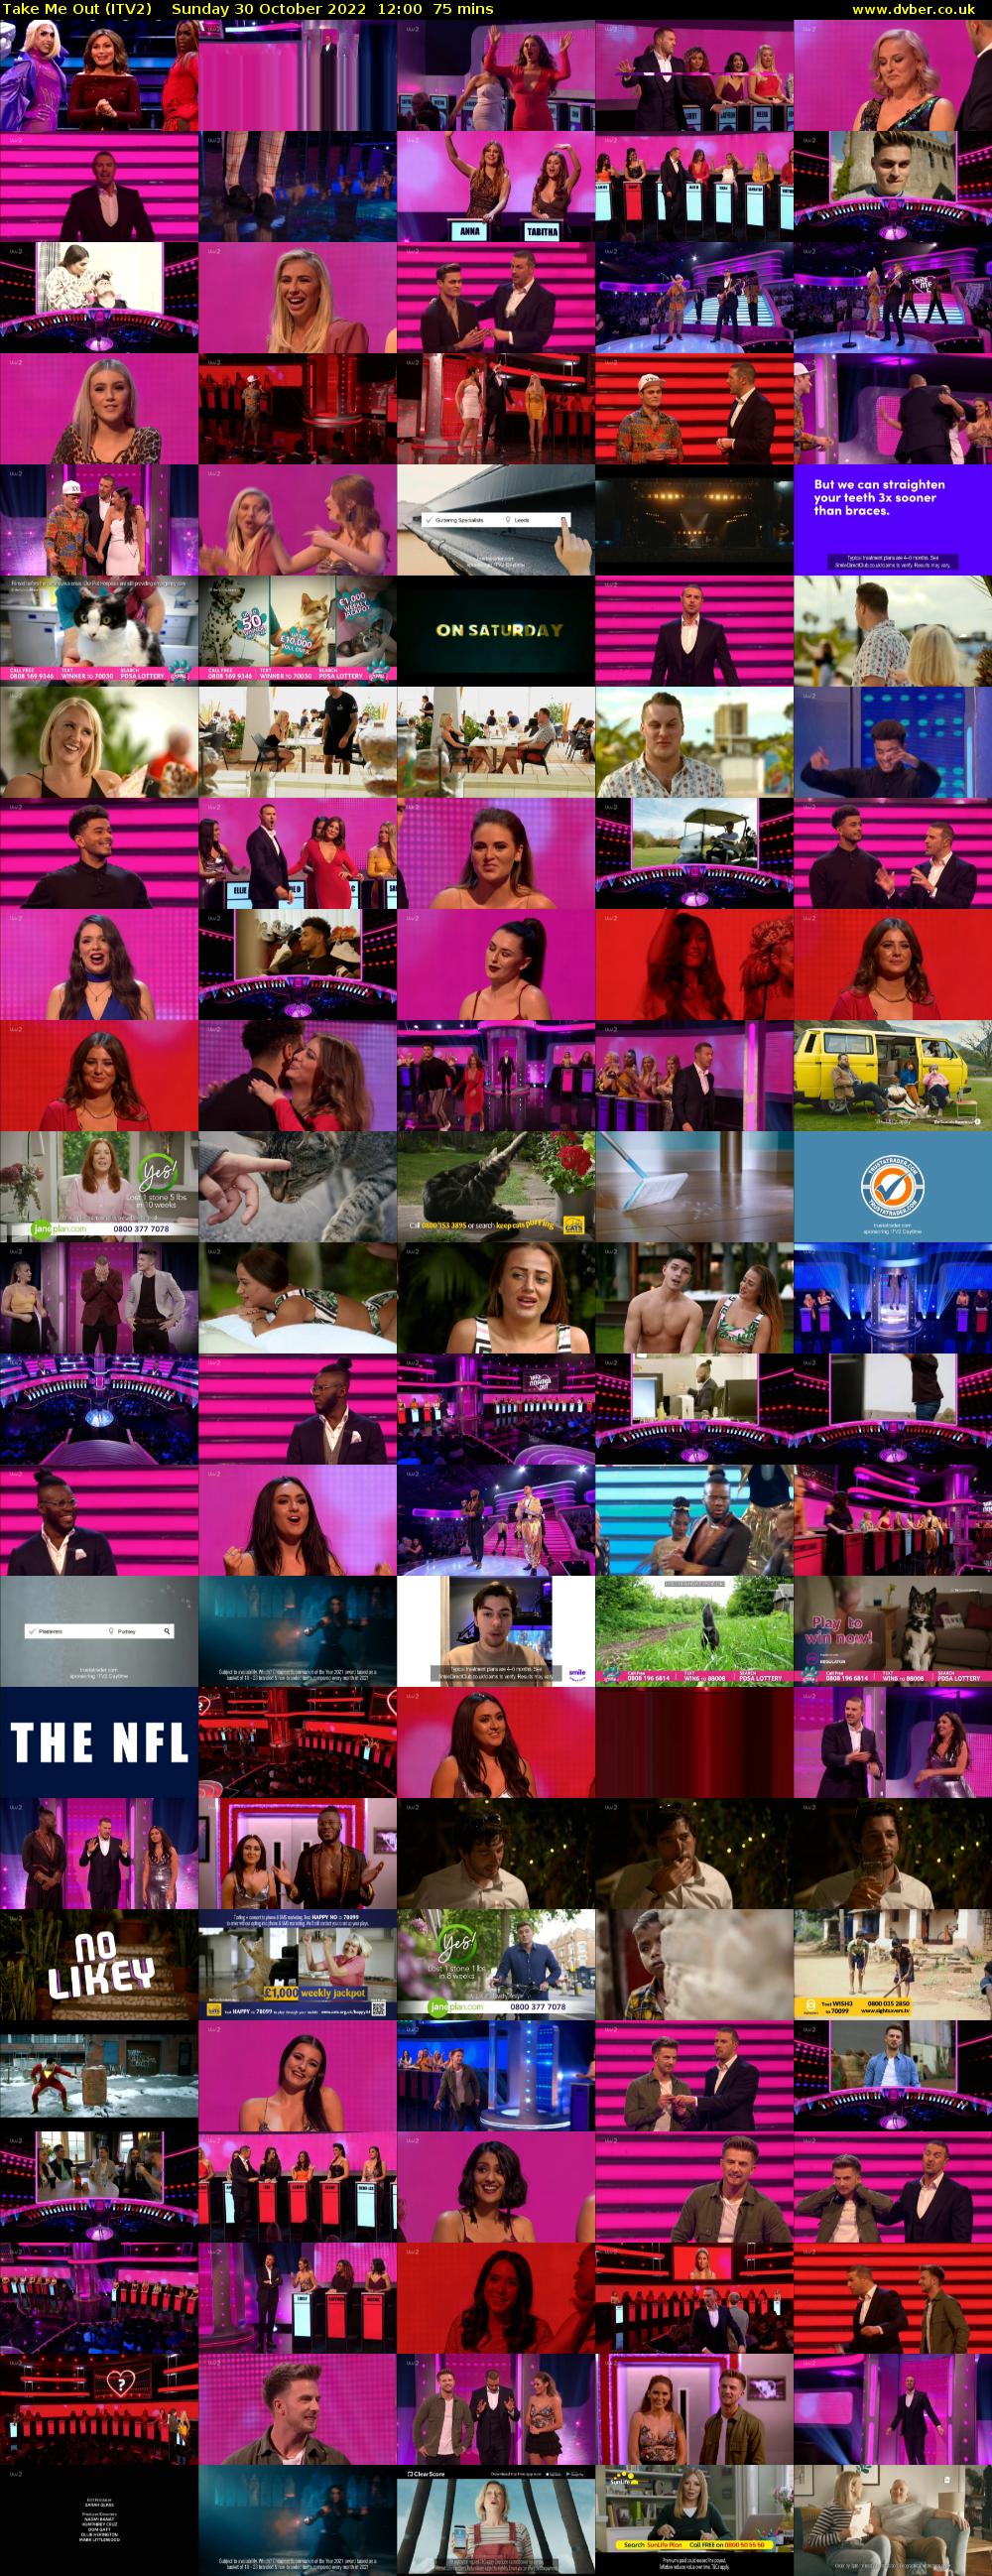 Take Me Out (ITV2) Sunday 30 October 2022 12:00 - 13:15